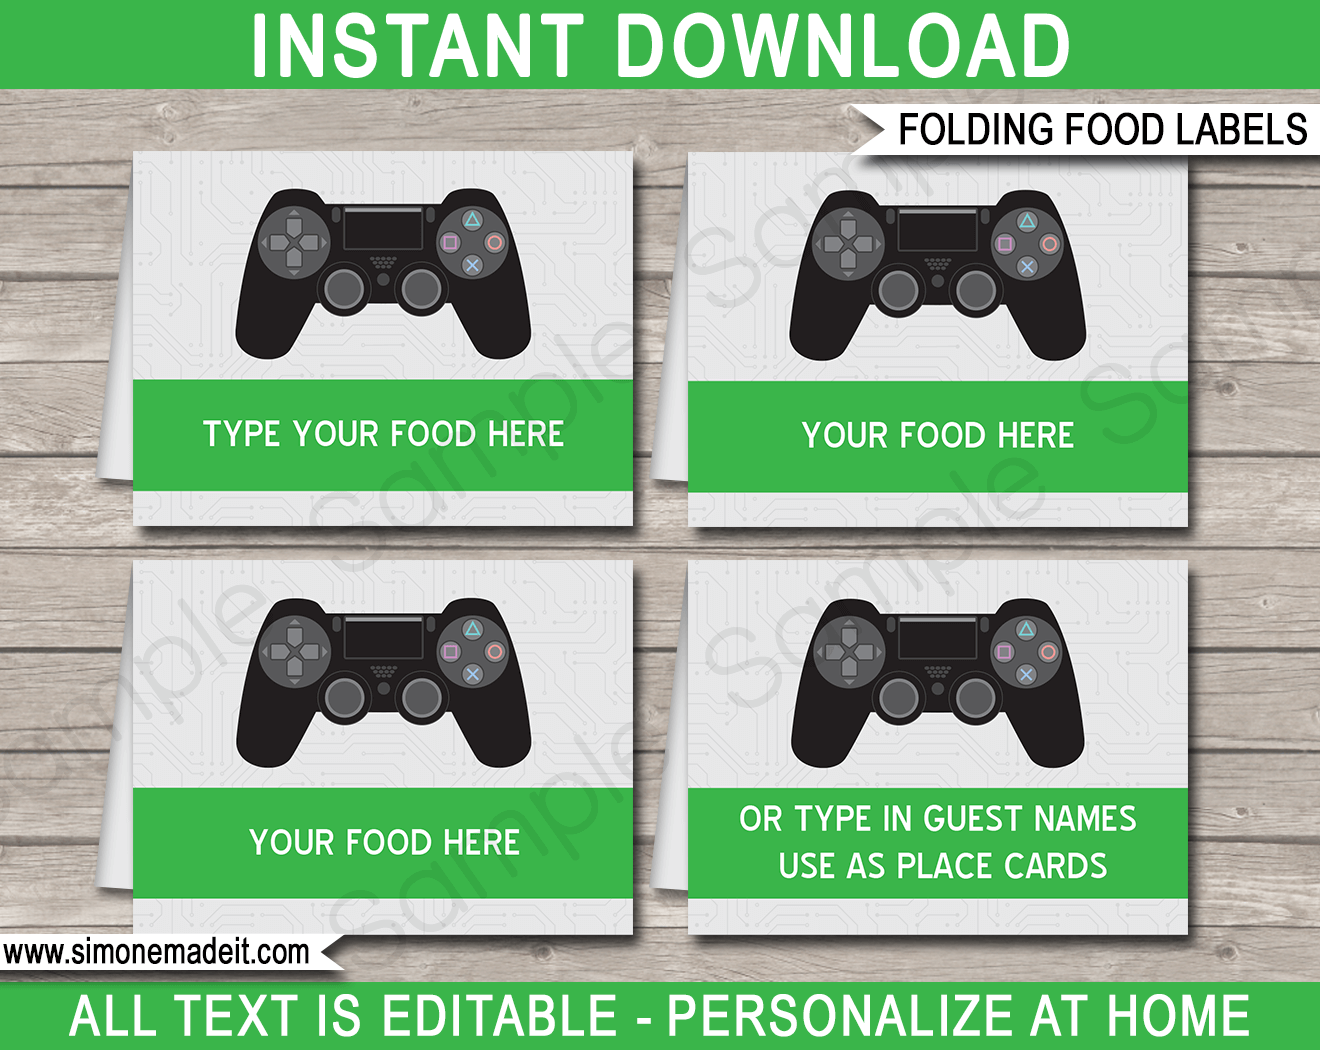 Printable Playstation Party Food Labels | Black Playstation controller | Food Buffet Tags | Place Cards | Video Game Theme Birthday Party | Editable DIY Template | Instant Download via SIMONEmadeit.com